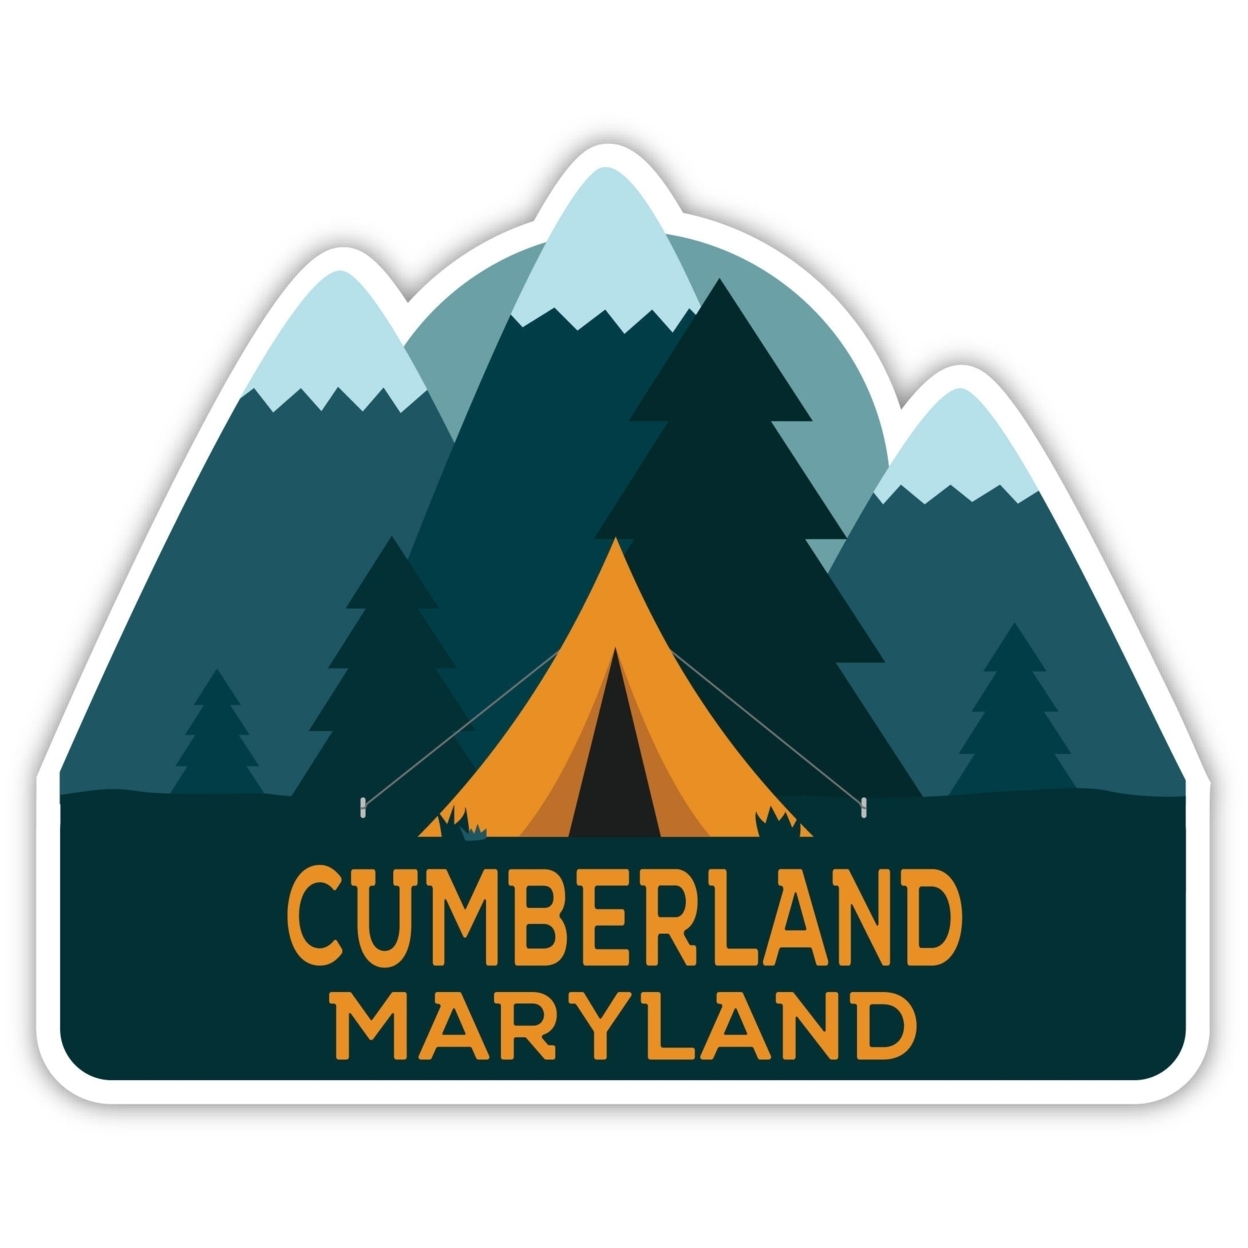 Cumberland Maryland Souvenir Decorative Stickers (Choose Theme And Size) - Single Unit, 4-Inch, Tent